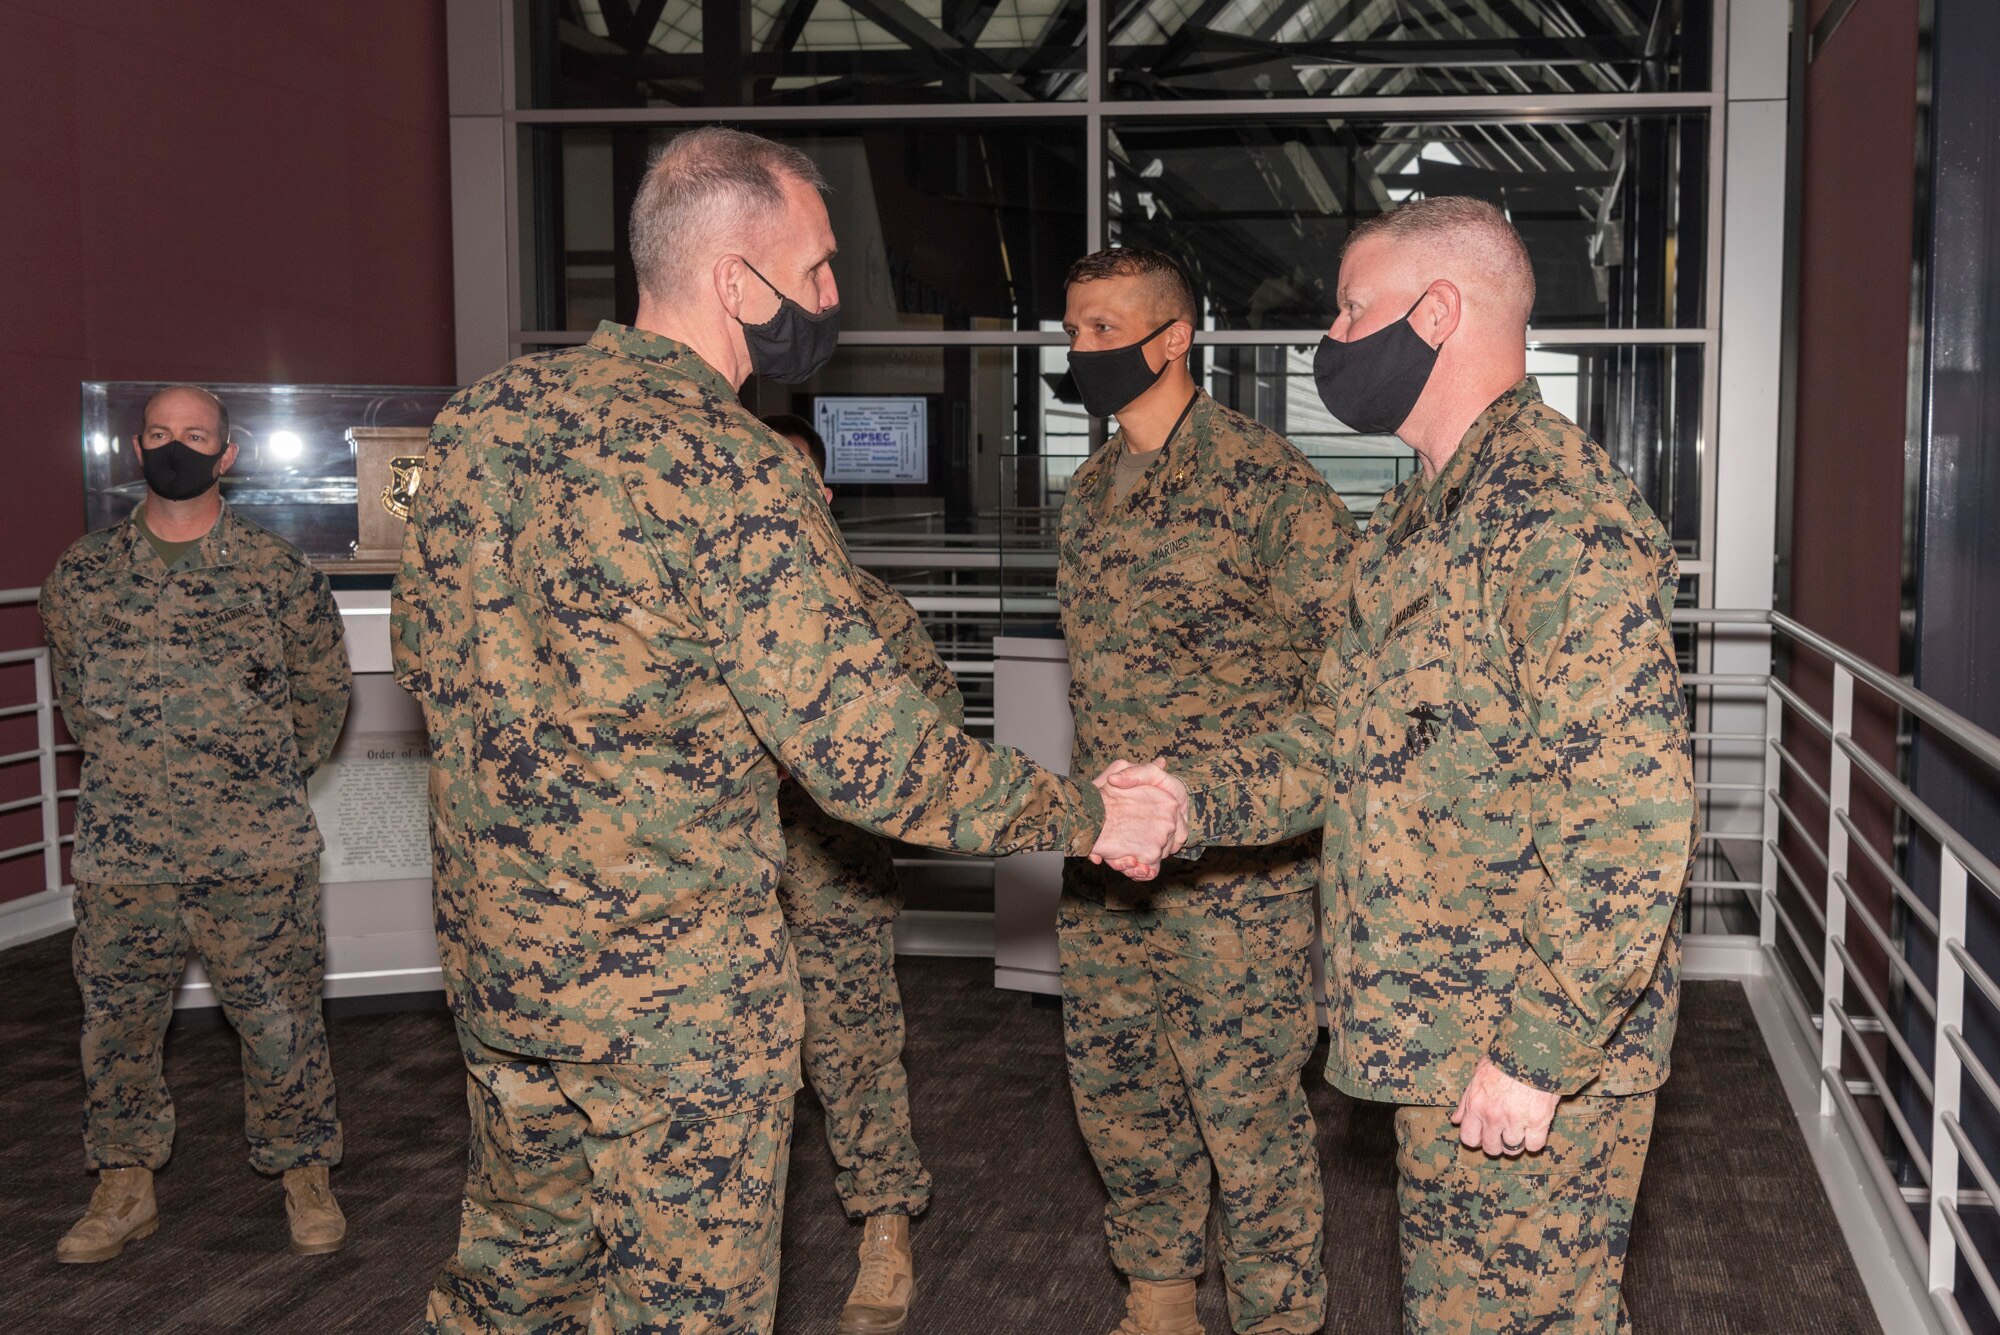 U.S. Marine Corps Master Gunnery Sgt. Scott Stalker (right), U.S. Space Command command senior enlisted leader, greets Gen. Gary Thomas, assistant commandant of the Marine Corps on Dec. 11, 2020, at USSPACECOM headquarters at Peterson Air Force Base, Colorado.